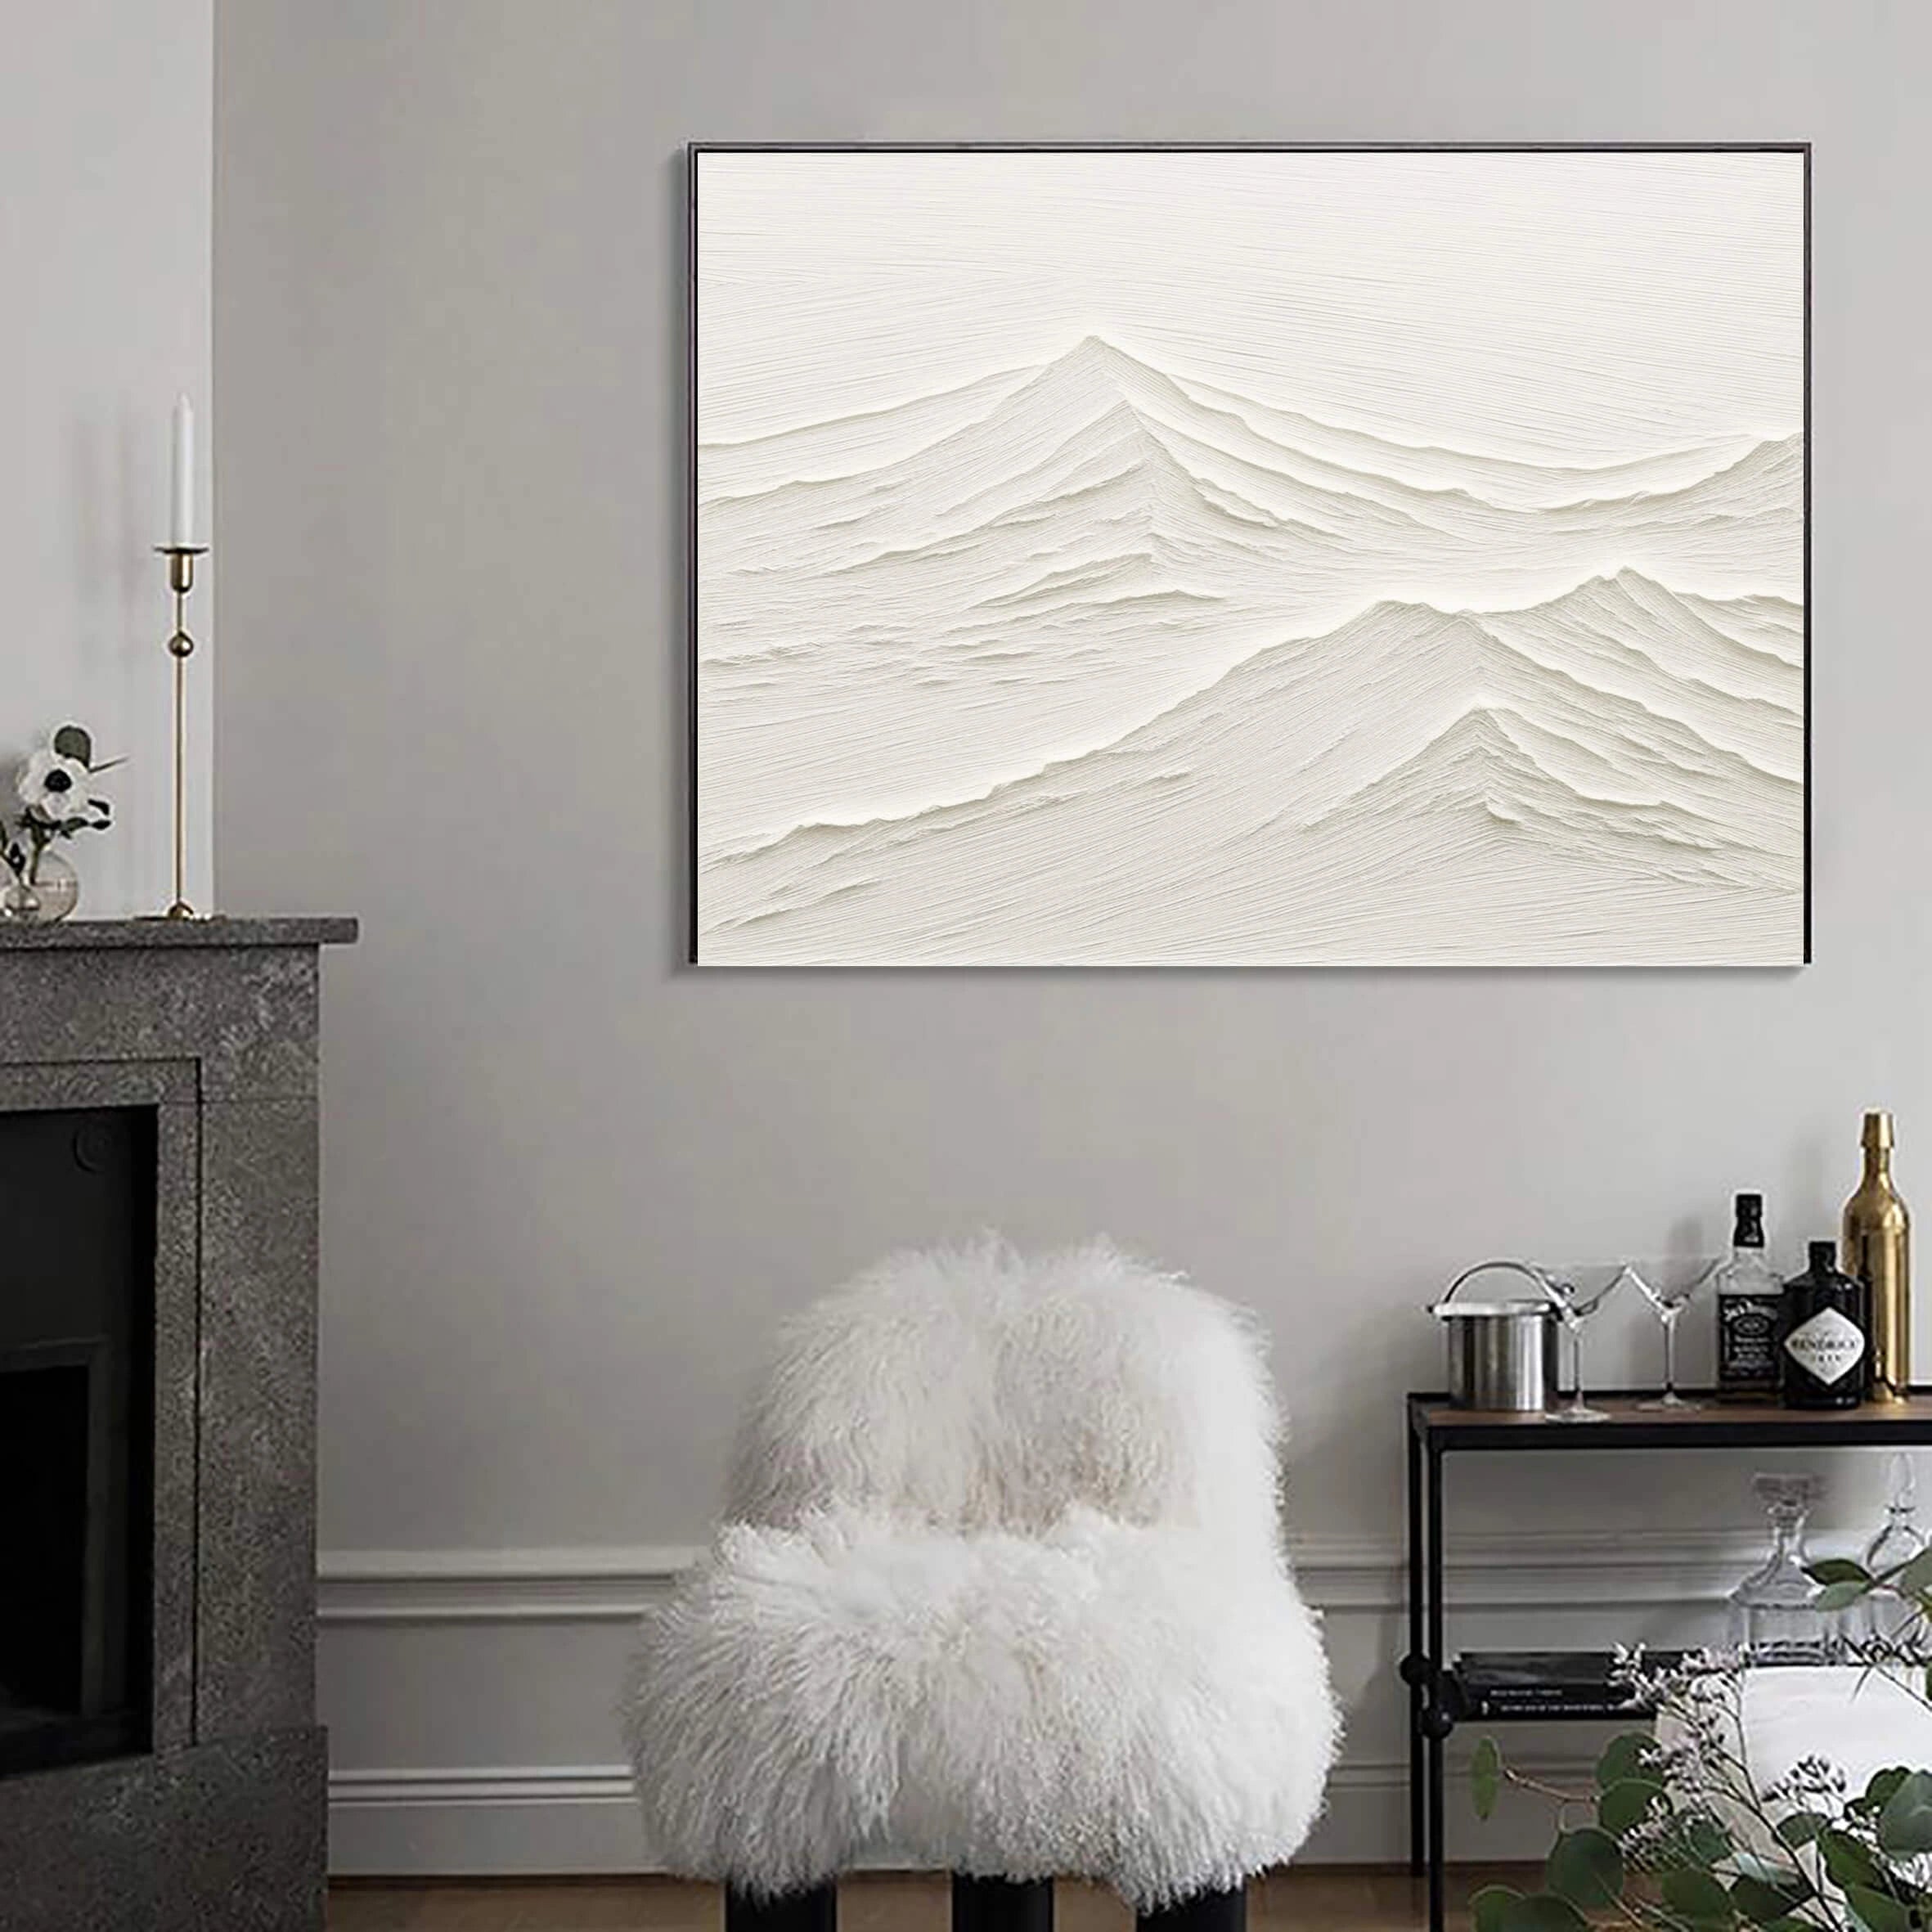 Hand-Painted Landscape Beige Plaster Art Framed Canvas Painting, Abstract Minimalist for Living Room